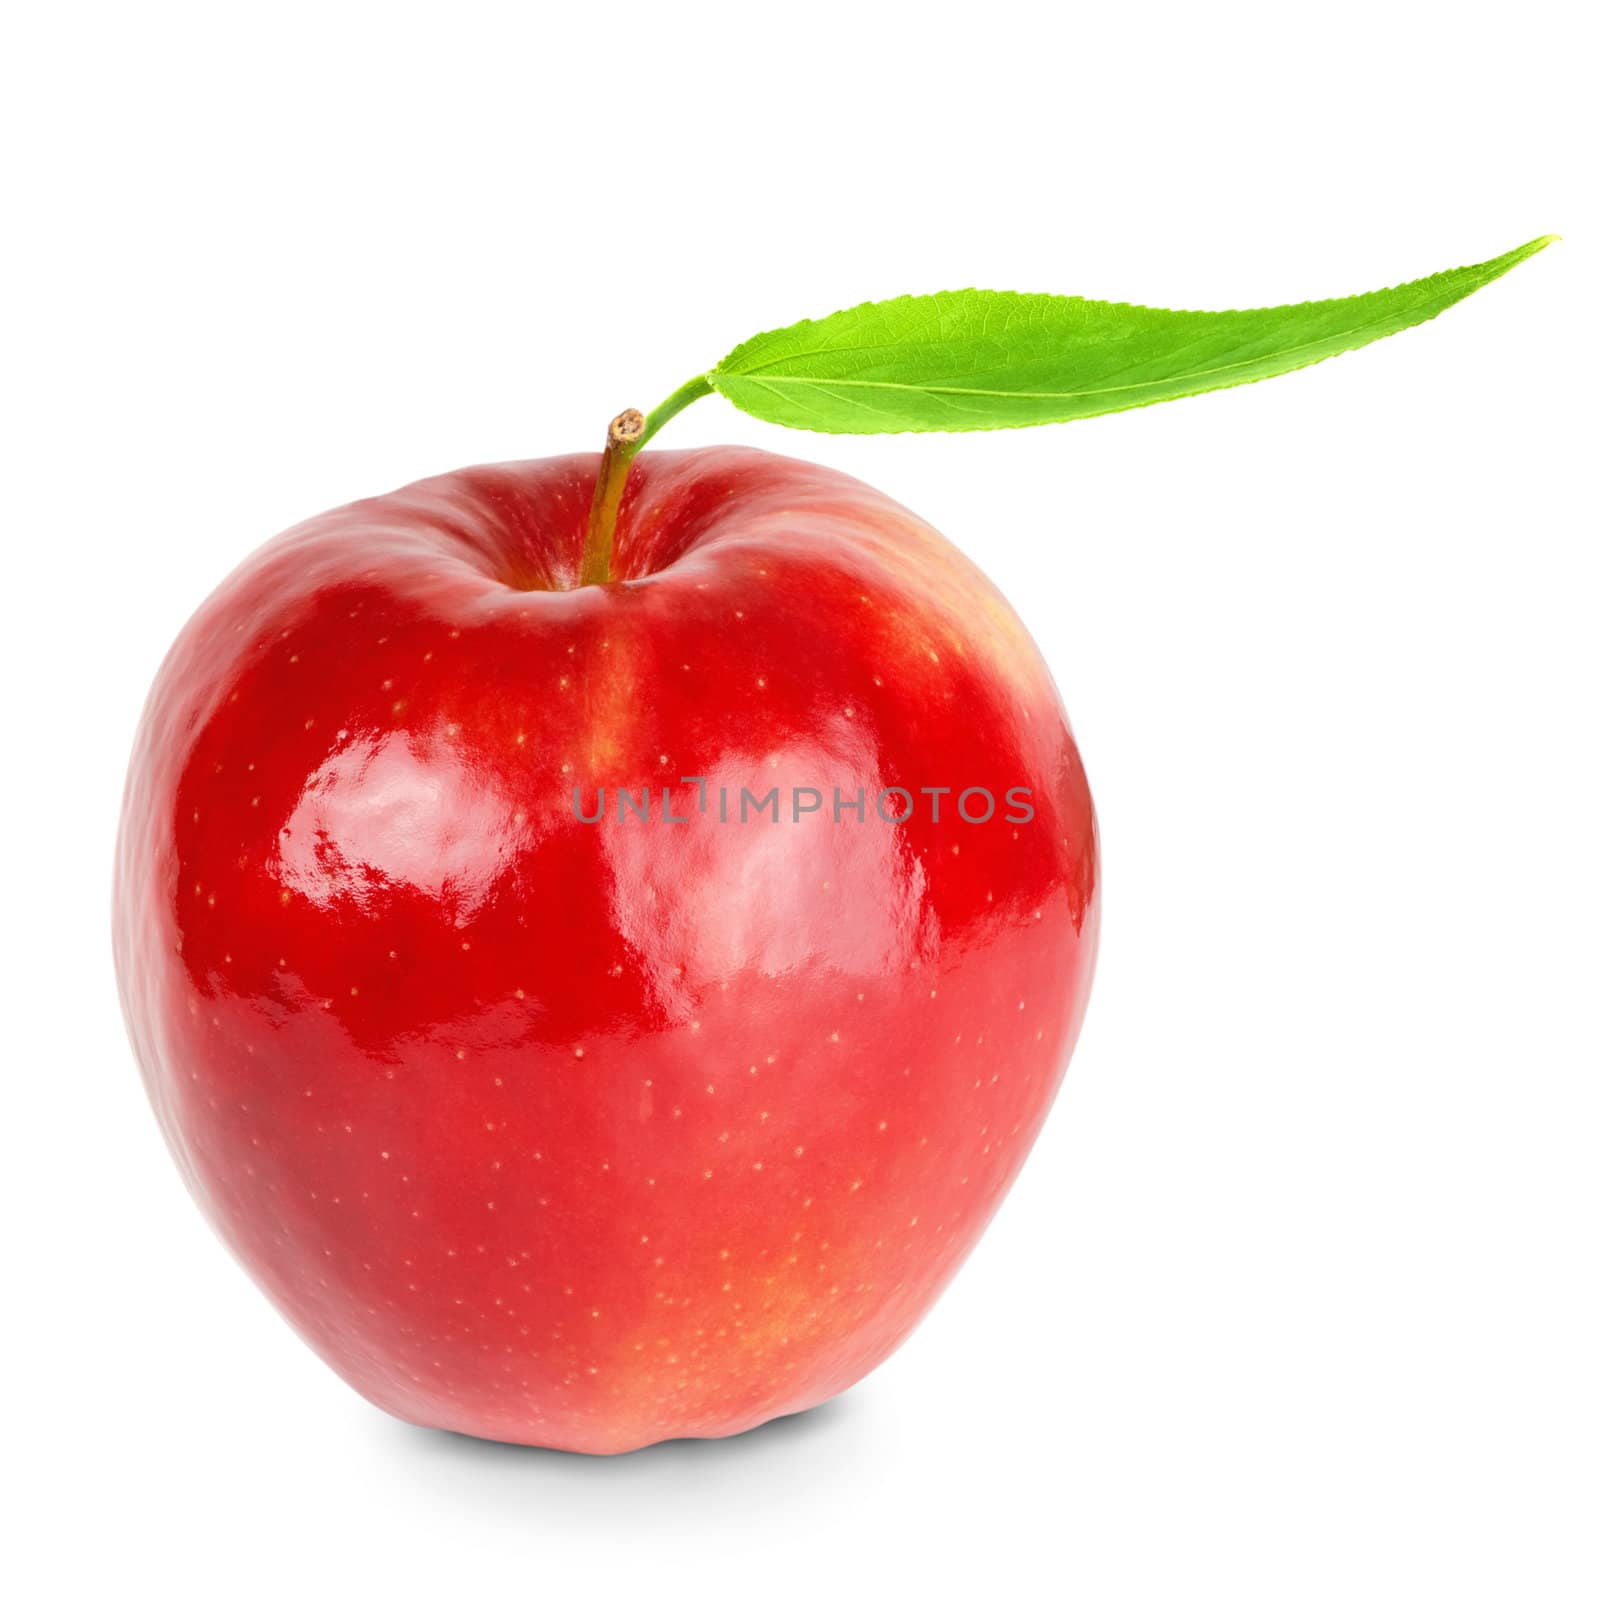 Red ripe apple over th white background